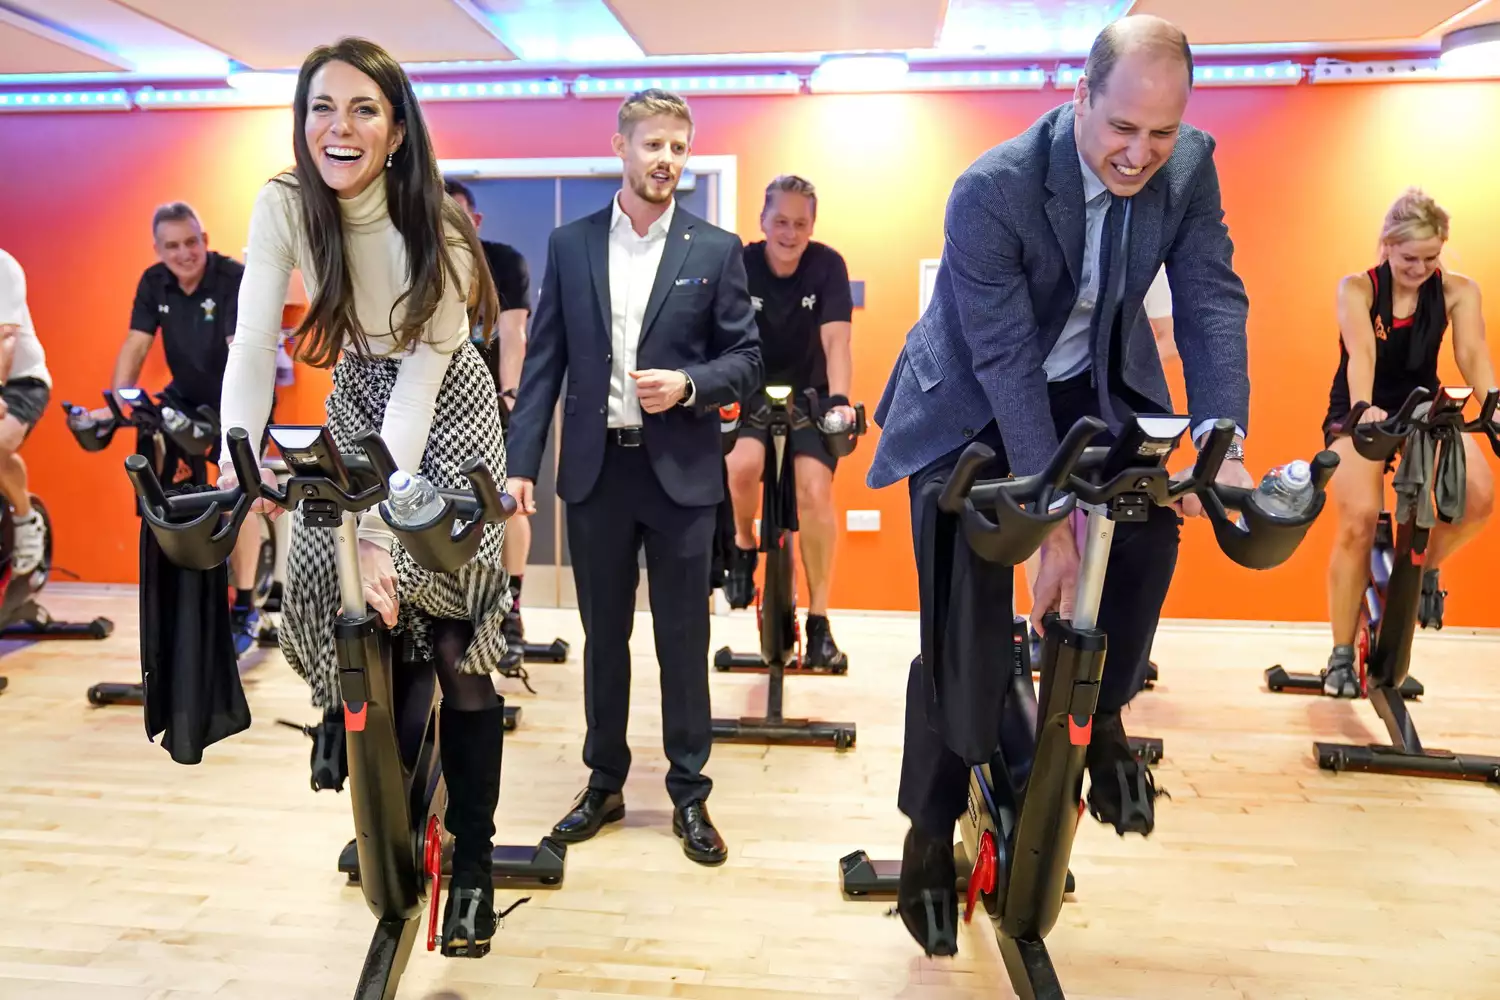 Prince William and Princess Catherine take part in a spin class during a visit to Aberavon Leisure and Fitness Centre in Port Talbot